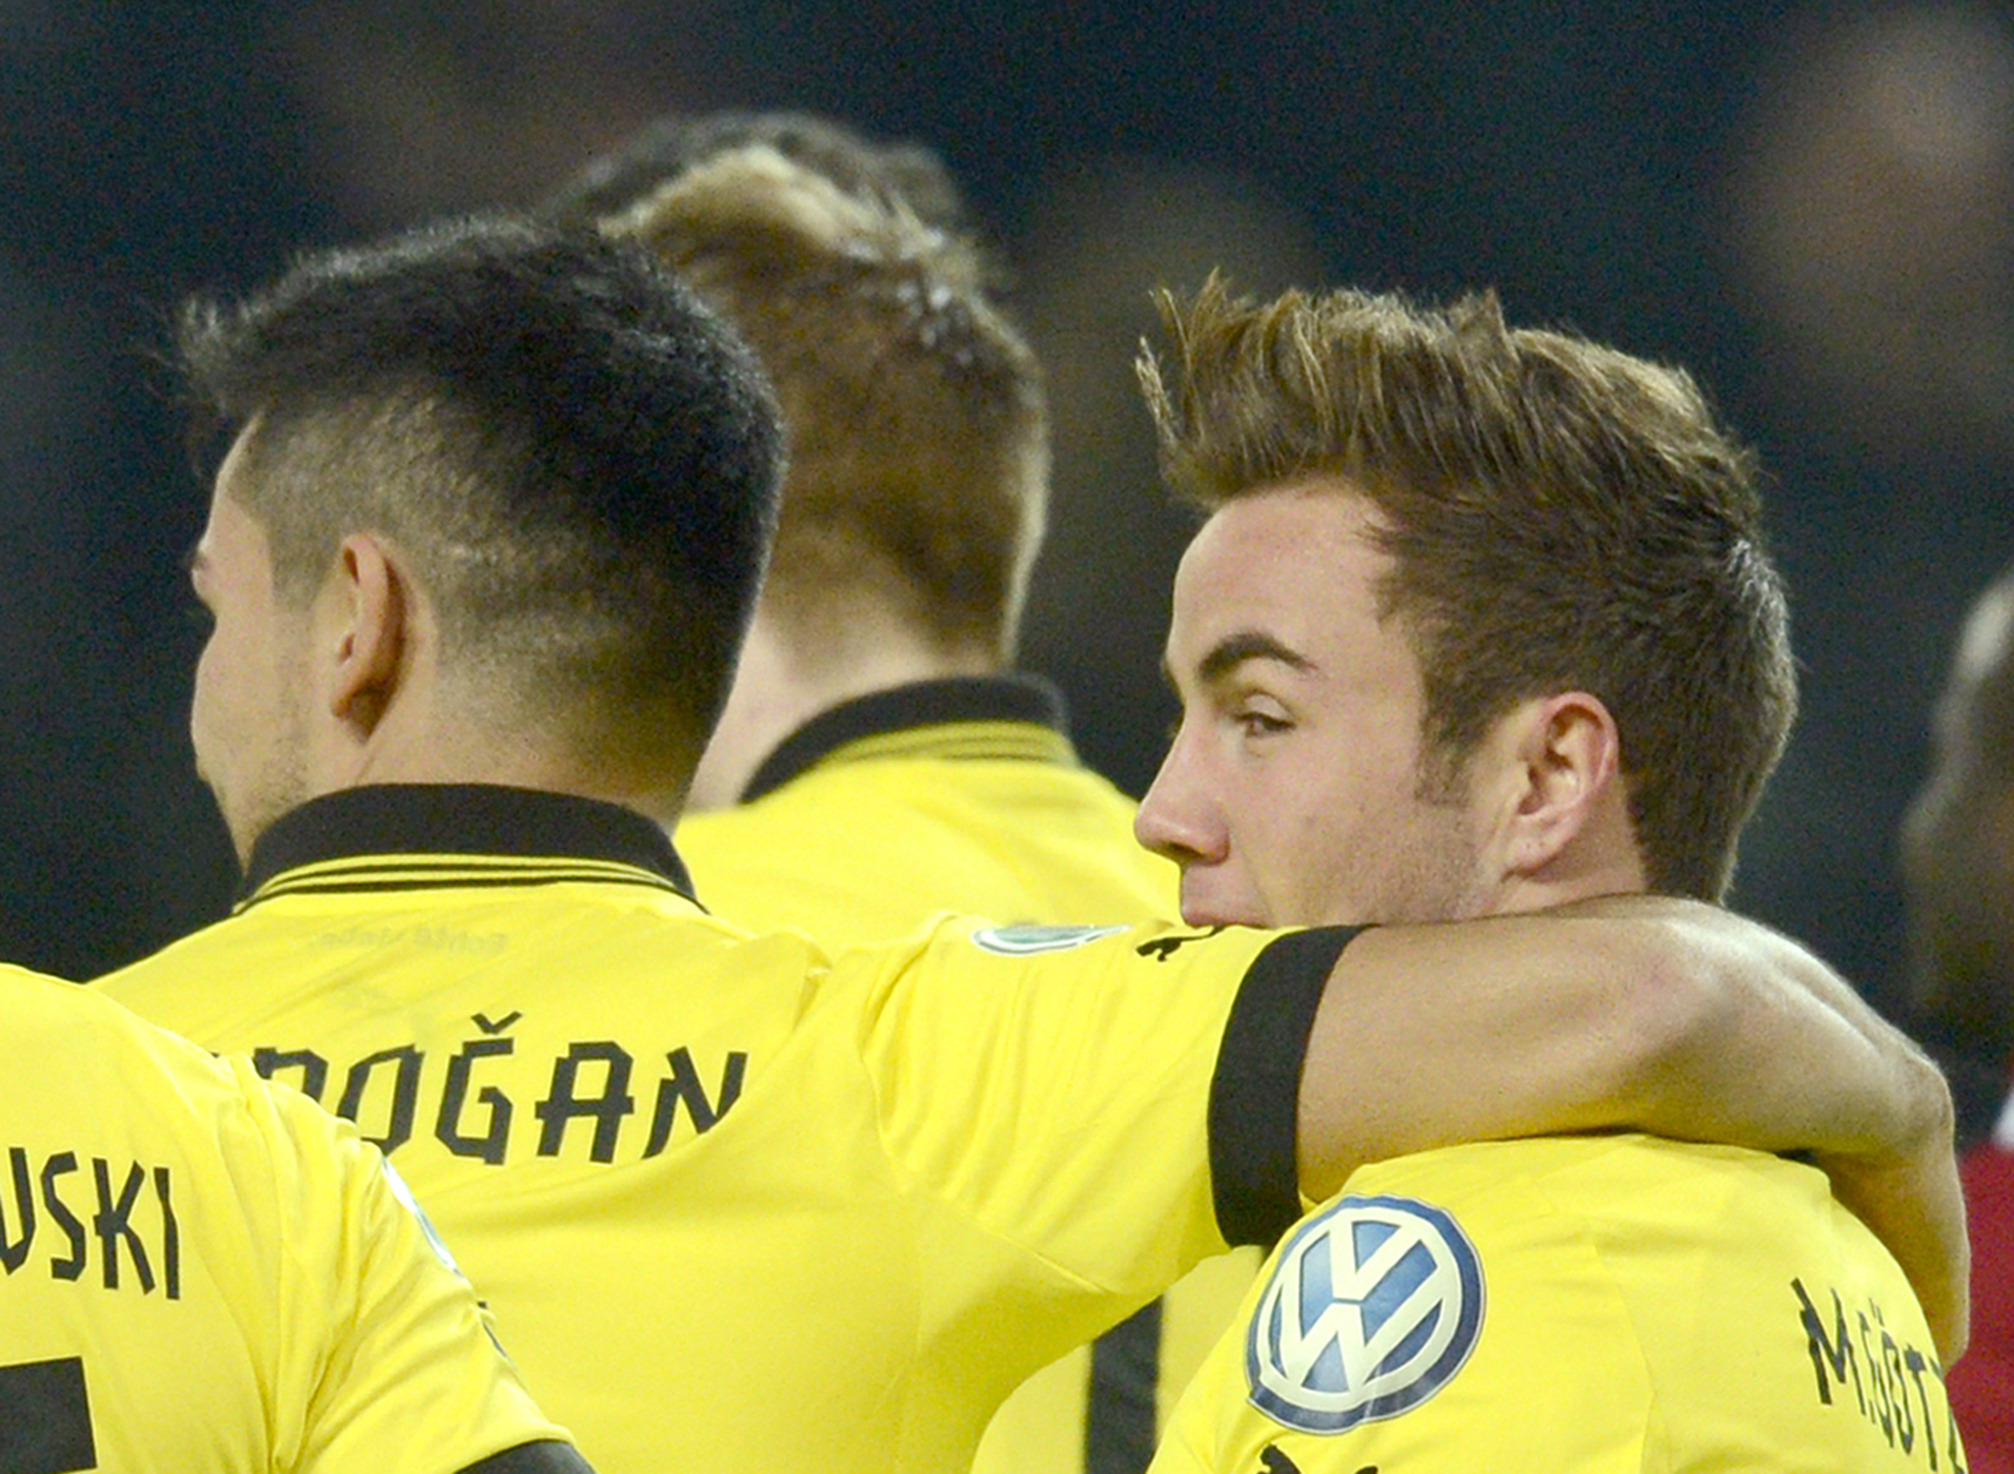 epa03514461 Dortmund's (L-R) Ilkay Gündogan and Mario Goetze celebrate after scoring the opening goal during the round of 16 DFB Cup match between Borussia Dortmund vs Hannover 96 in Dortmund, Germany, 19 December 2012. 
(ATTENTION: The DFB prohibits the utilisation and publication of sequential pictures on the internet and other online media during the match (including half-time). ATTENTION: BLOCKING PERIOD! The DFB permits the further utilisation and publication of the pictures for mobile services (especially MMS) and for DVB-H and DMB only after the end of the match.)  EPA/BERND THISSEN